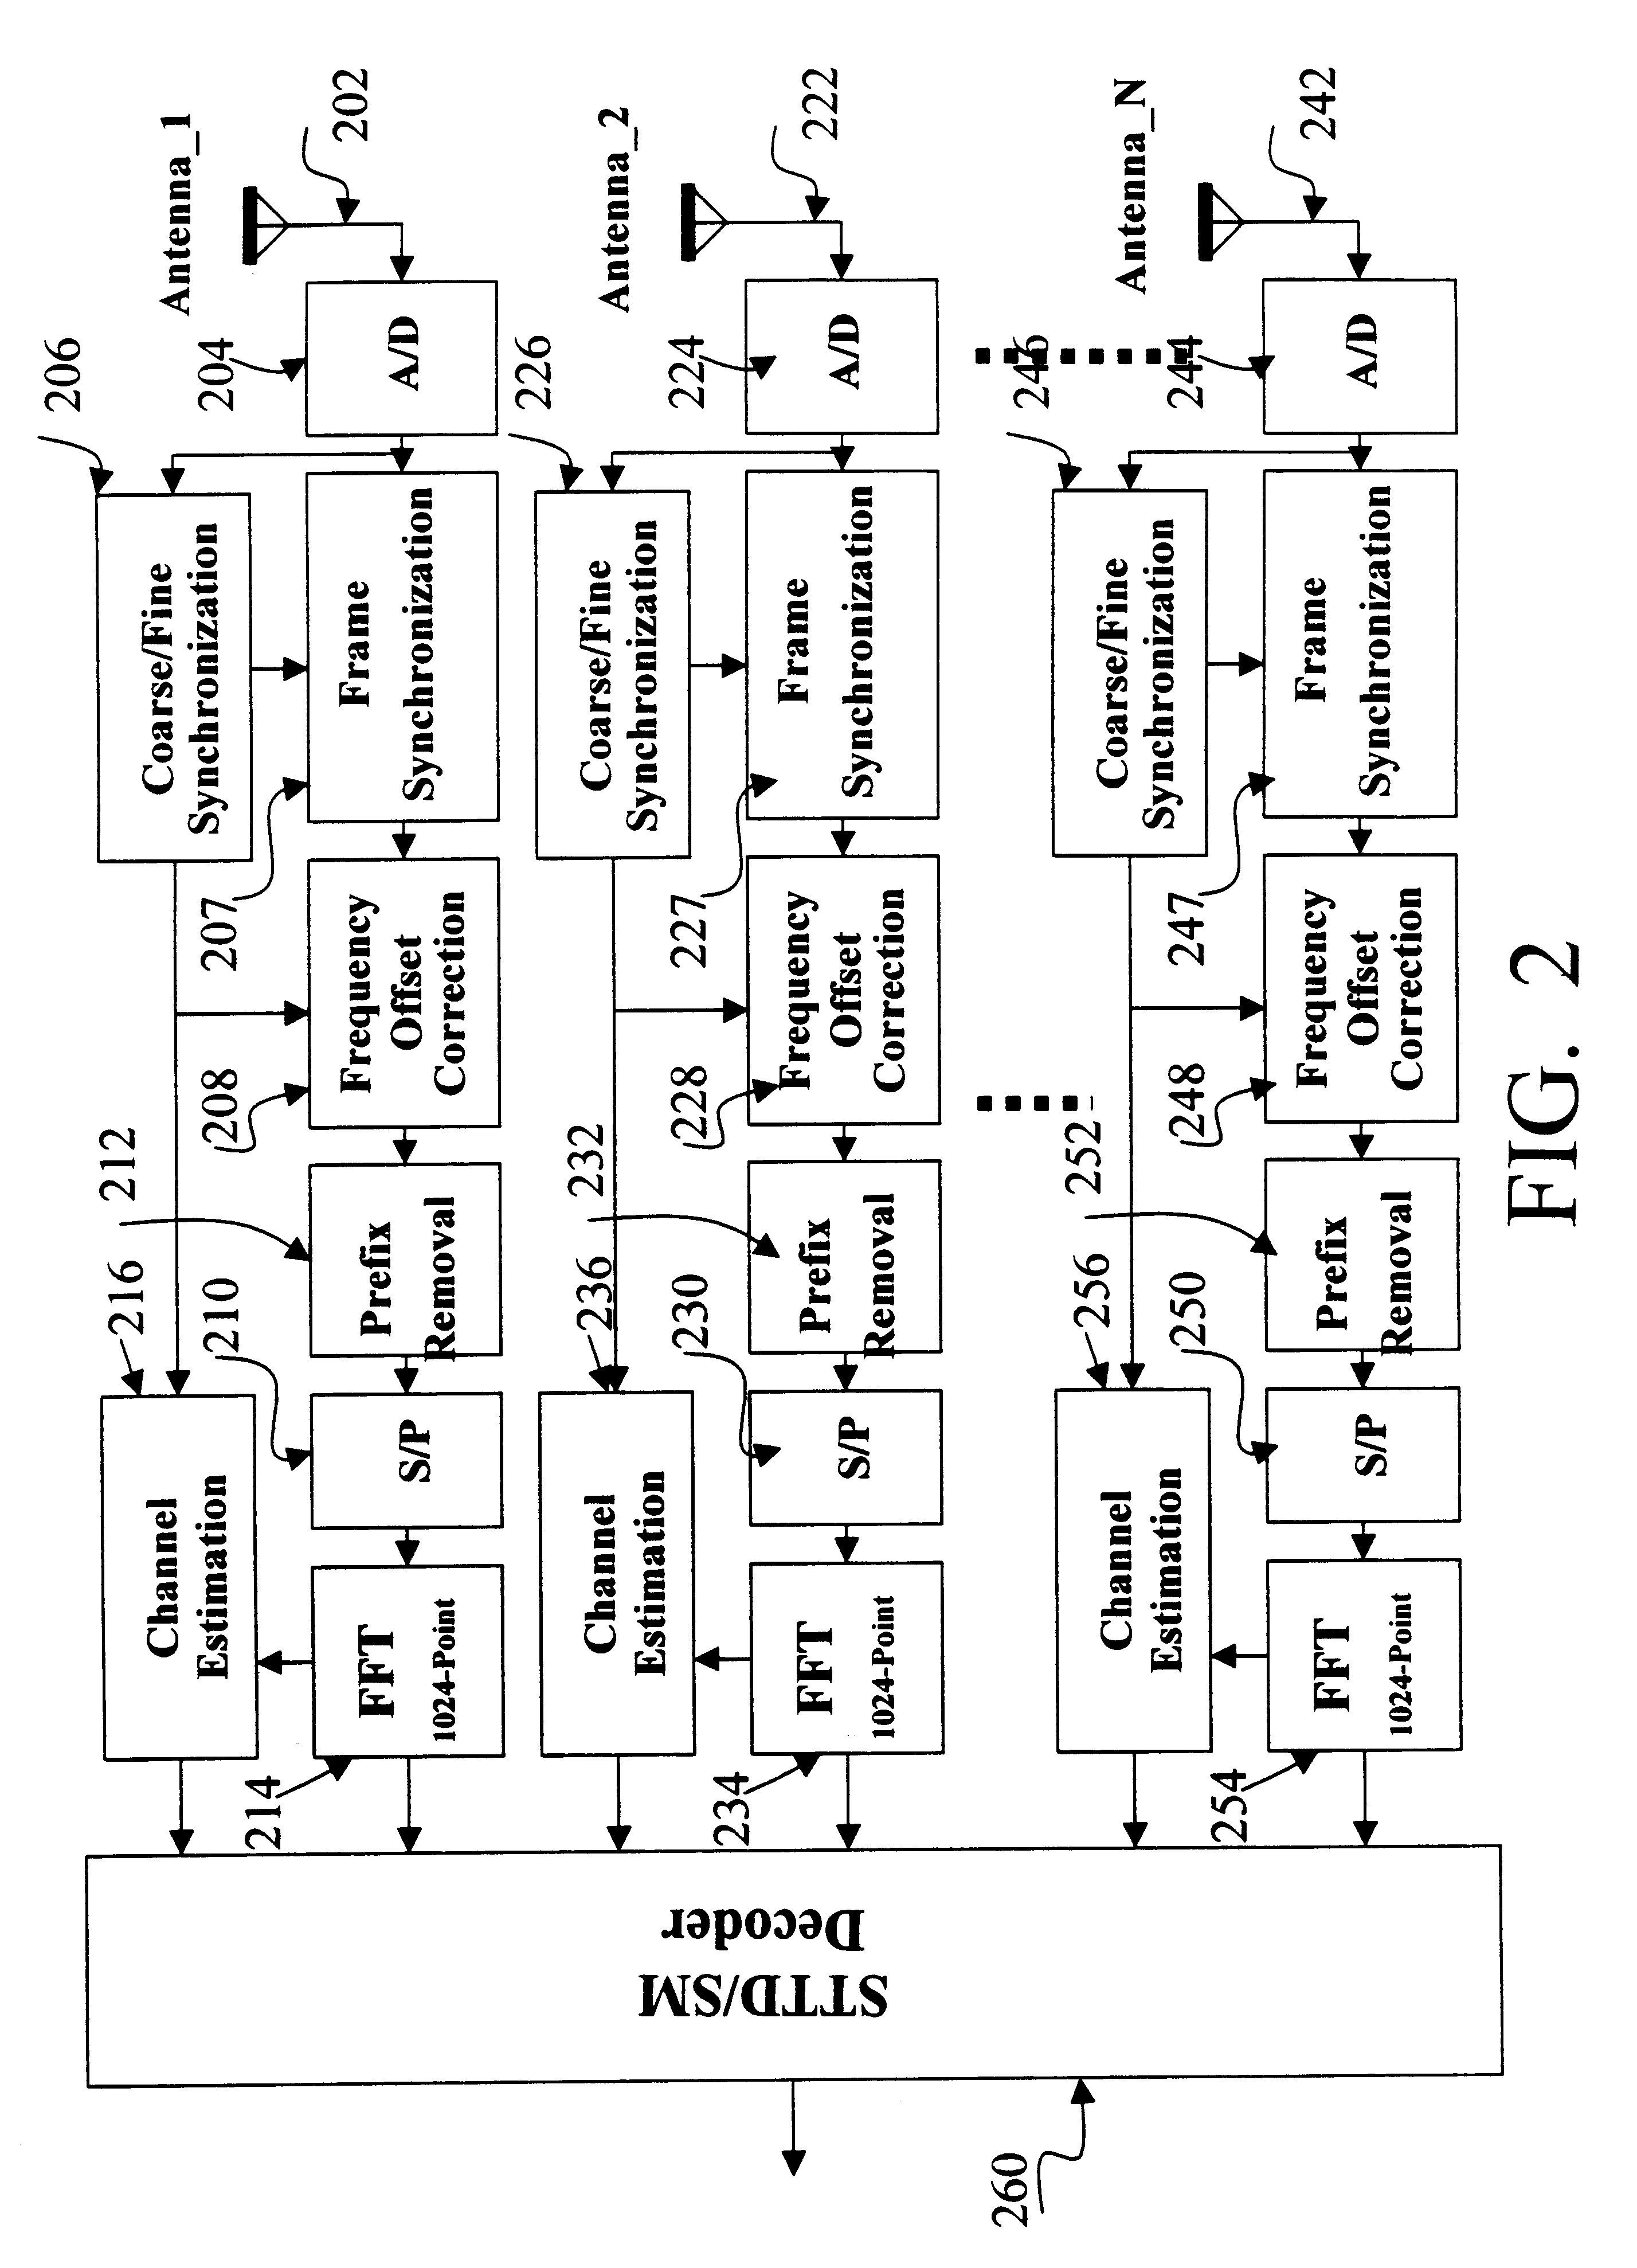 Channels estimation for multiple input-multiple output, orthogonal frequency division multiplexing (OFDM) system